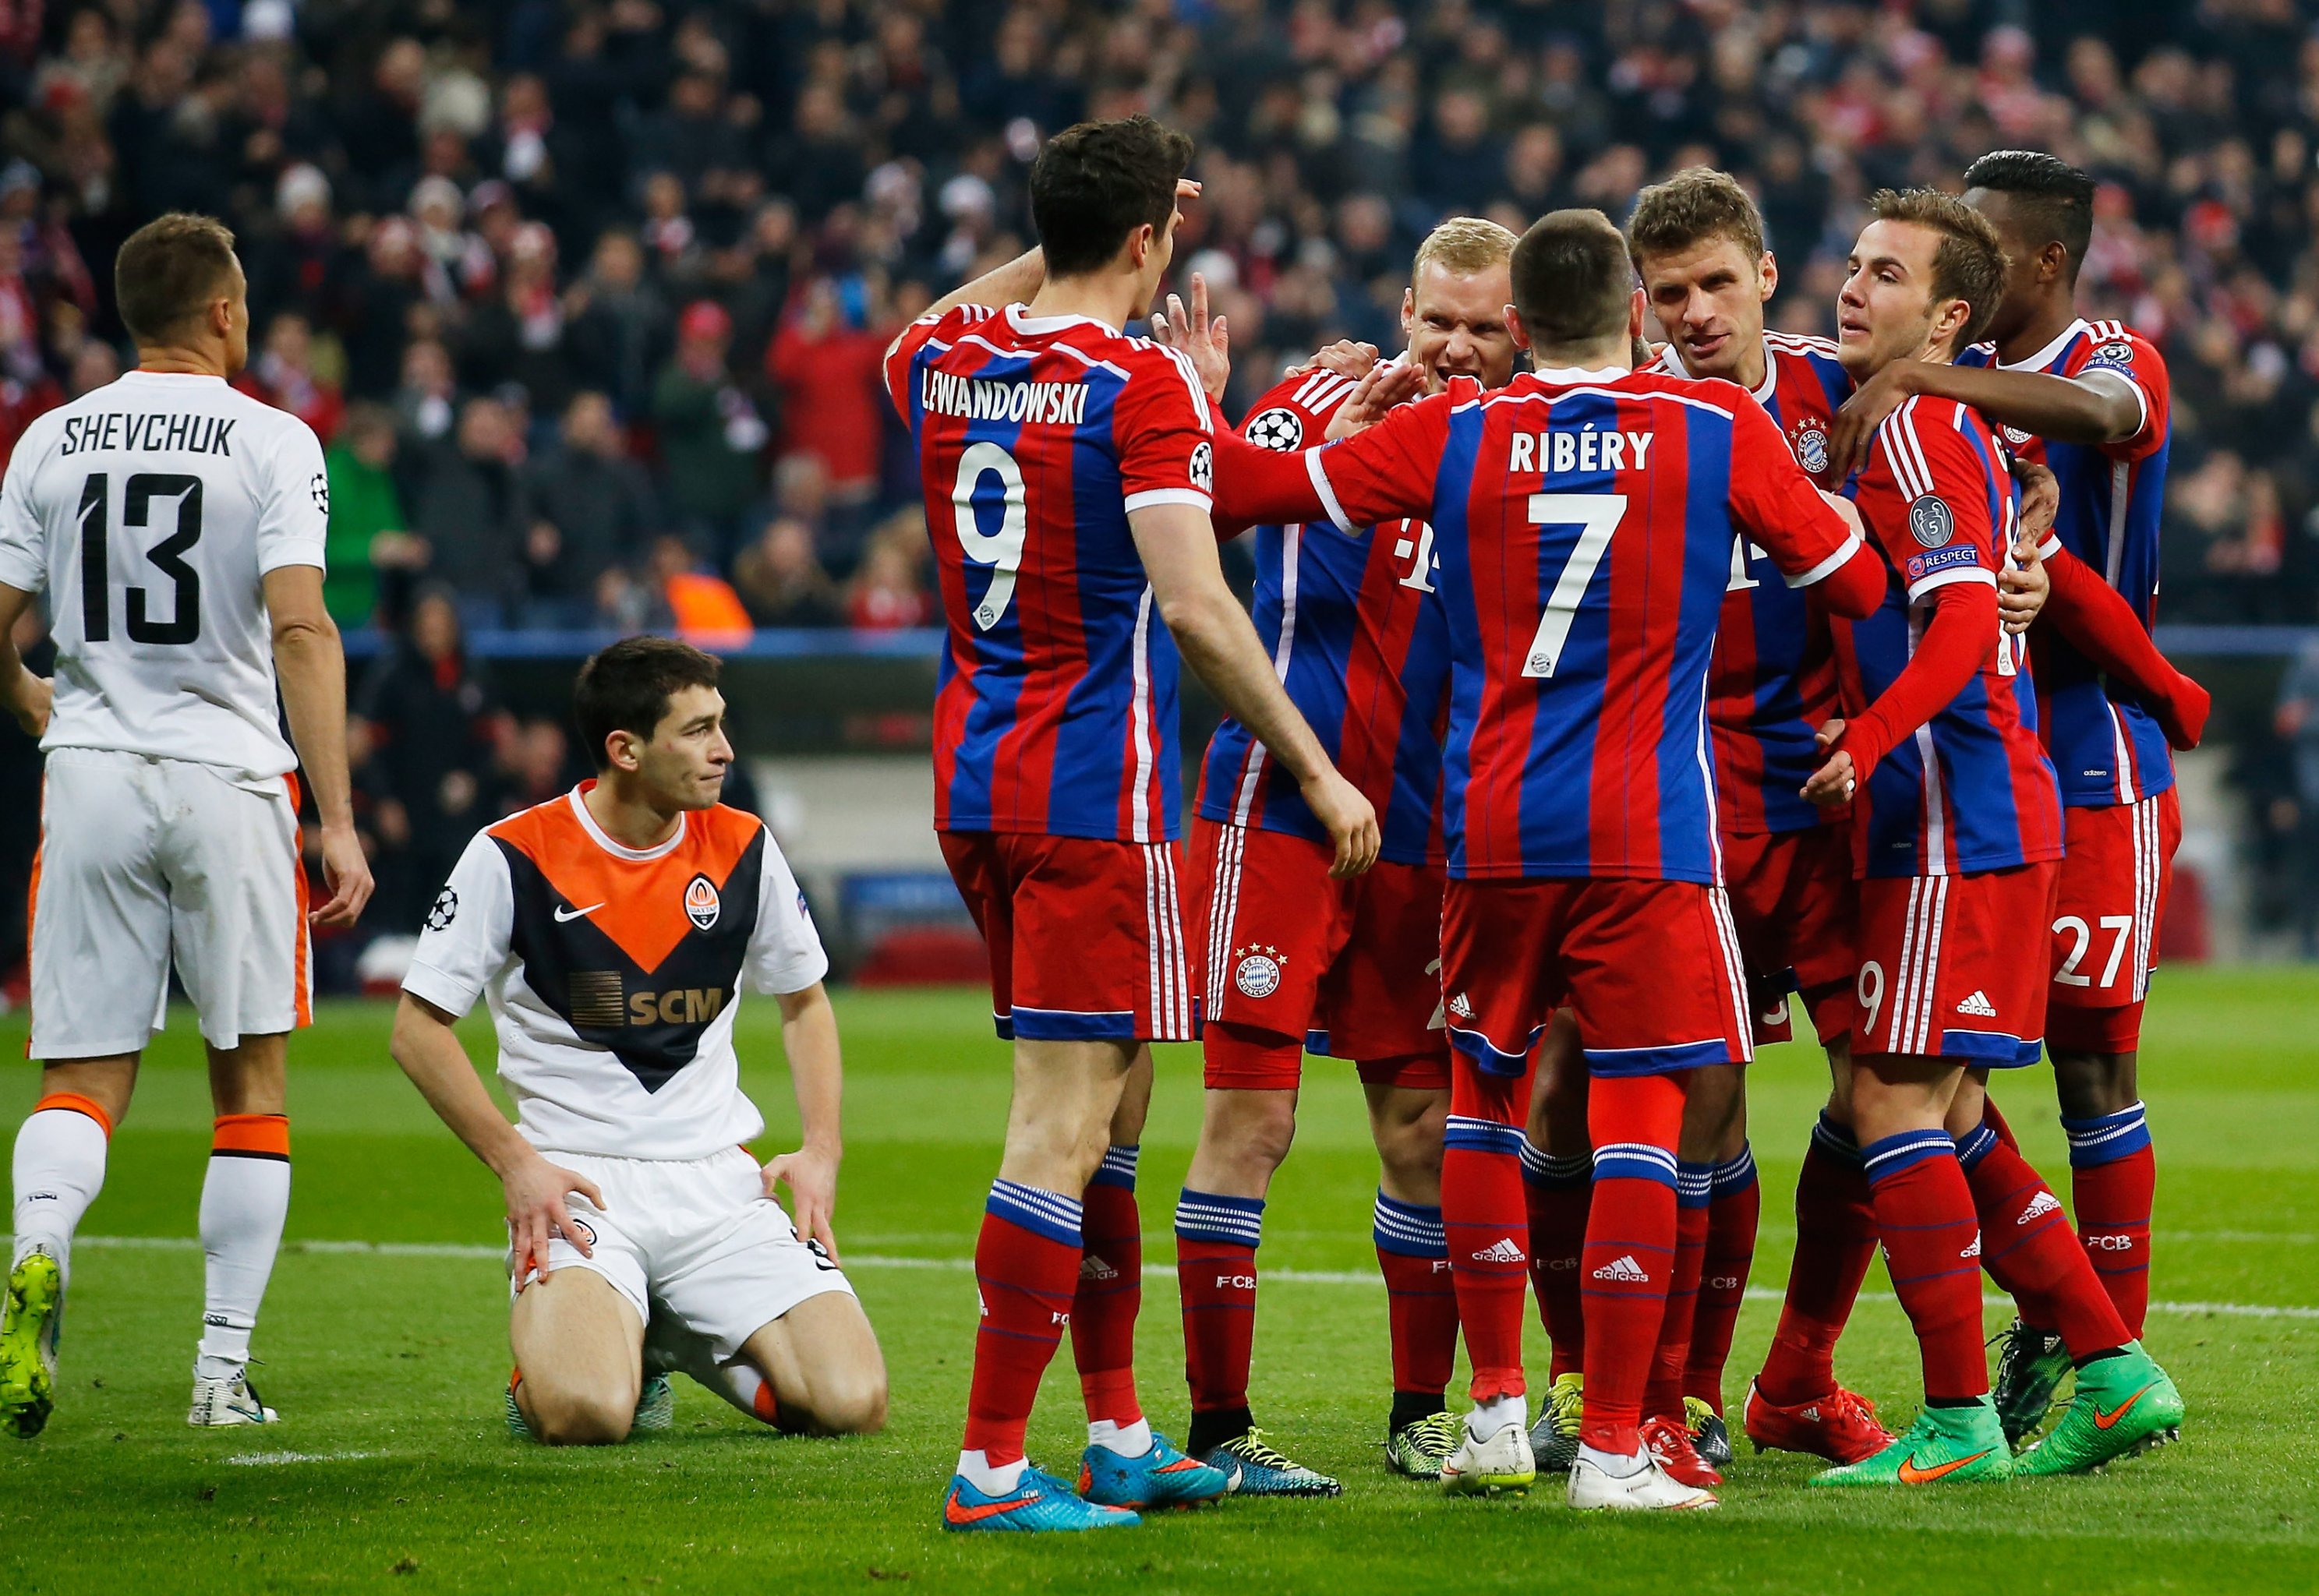 3 Things We Noticed: FC Bayern – RSC Anderlecht 3-0 (1-0) –